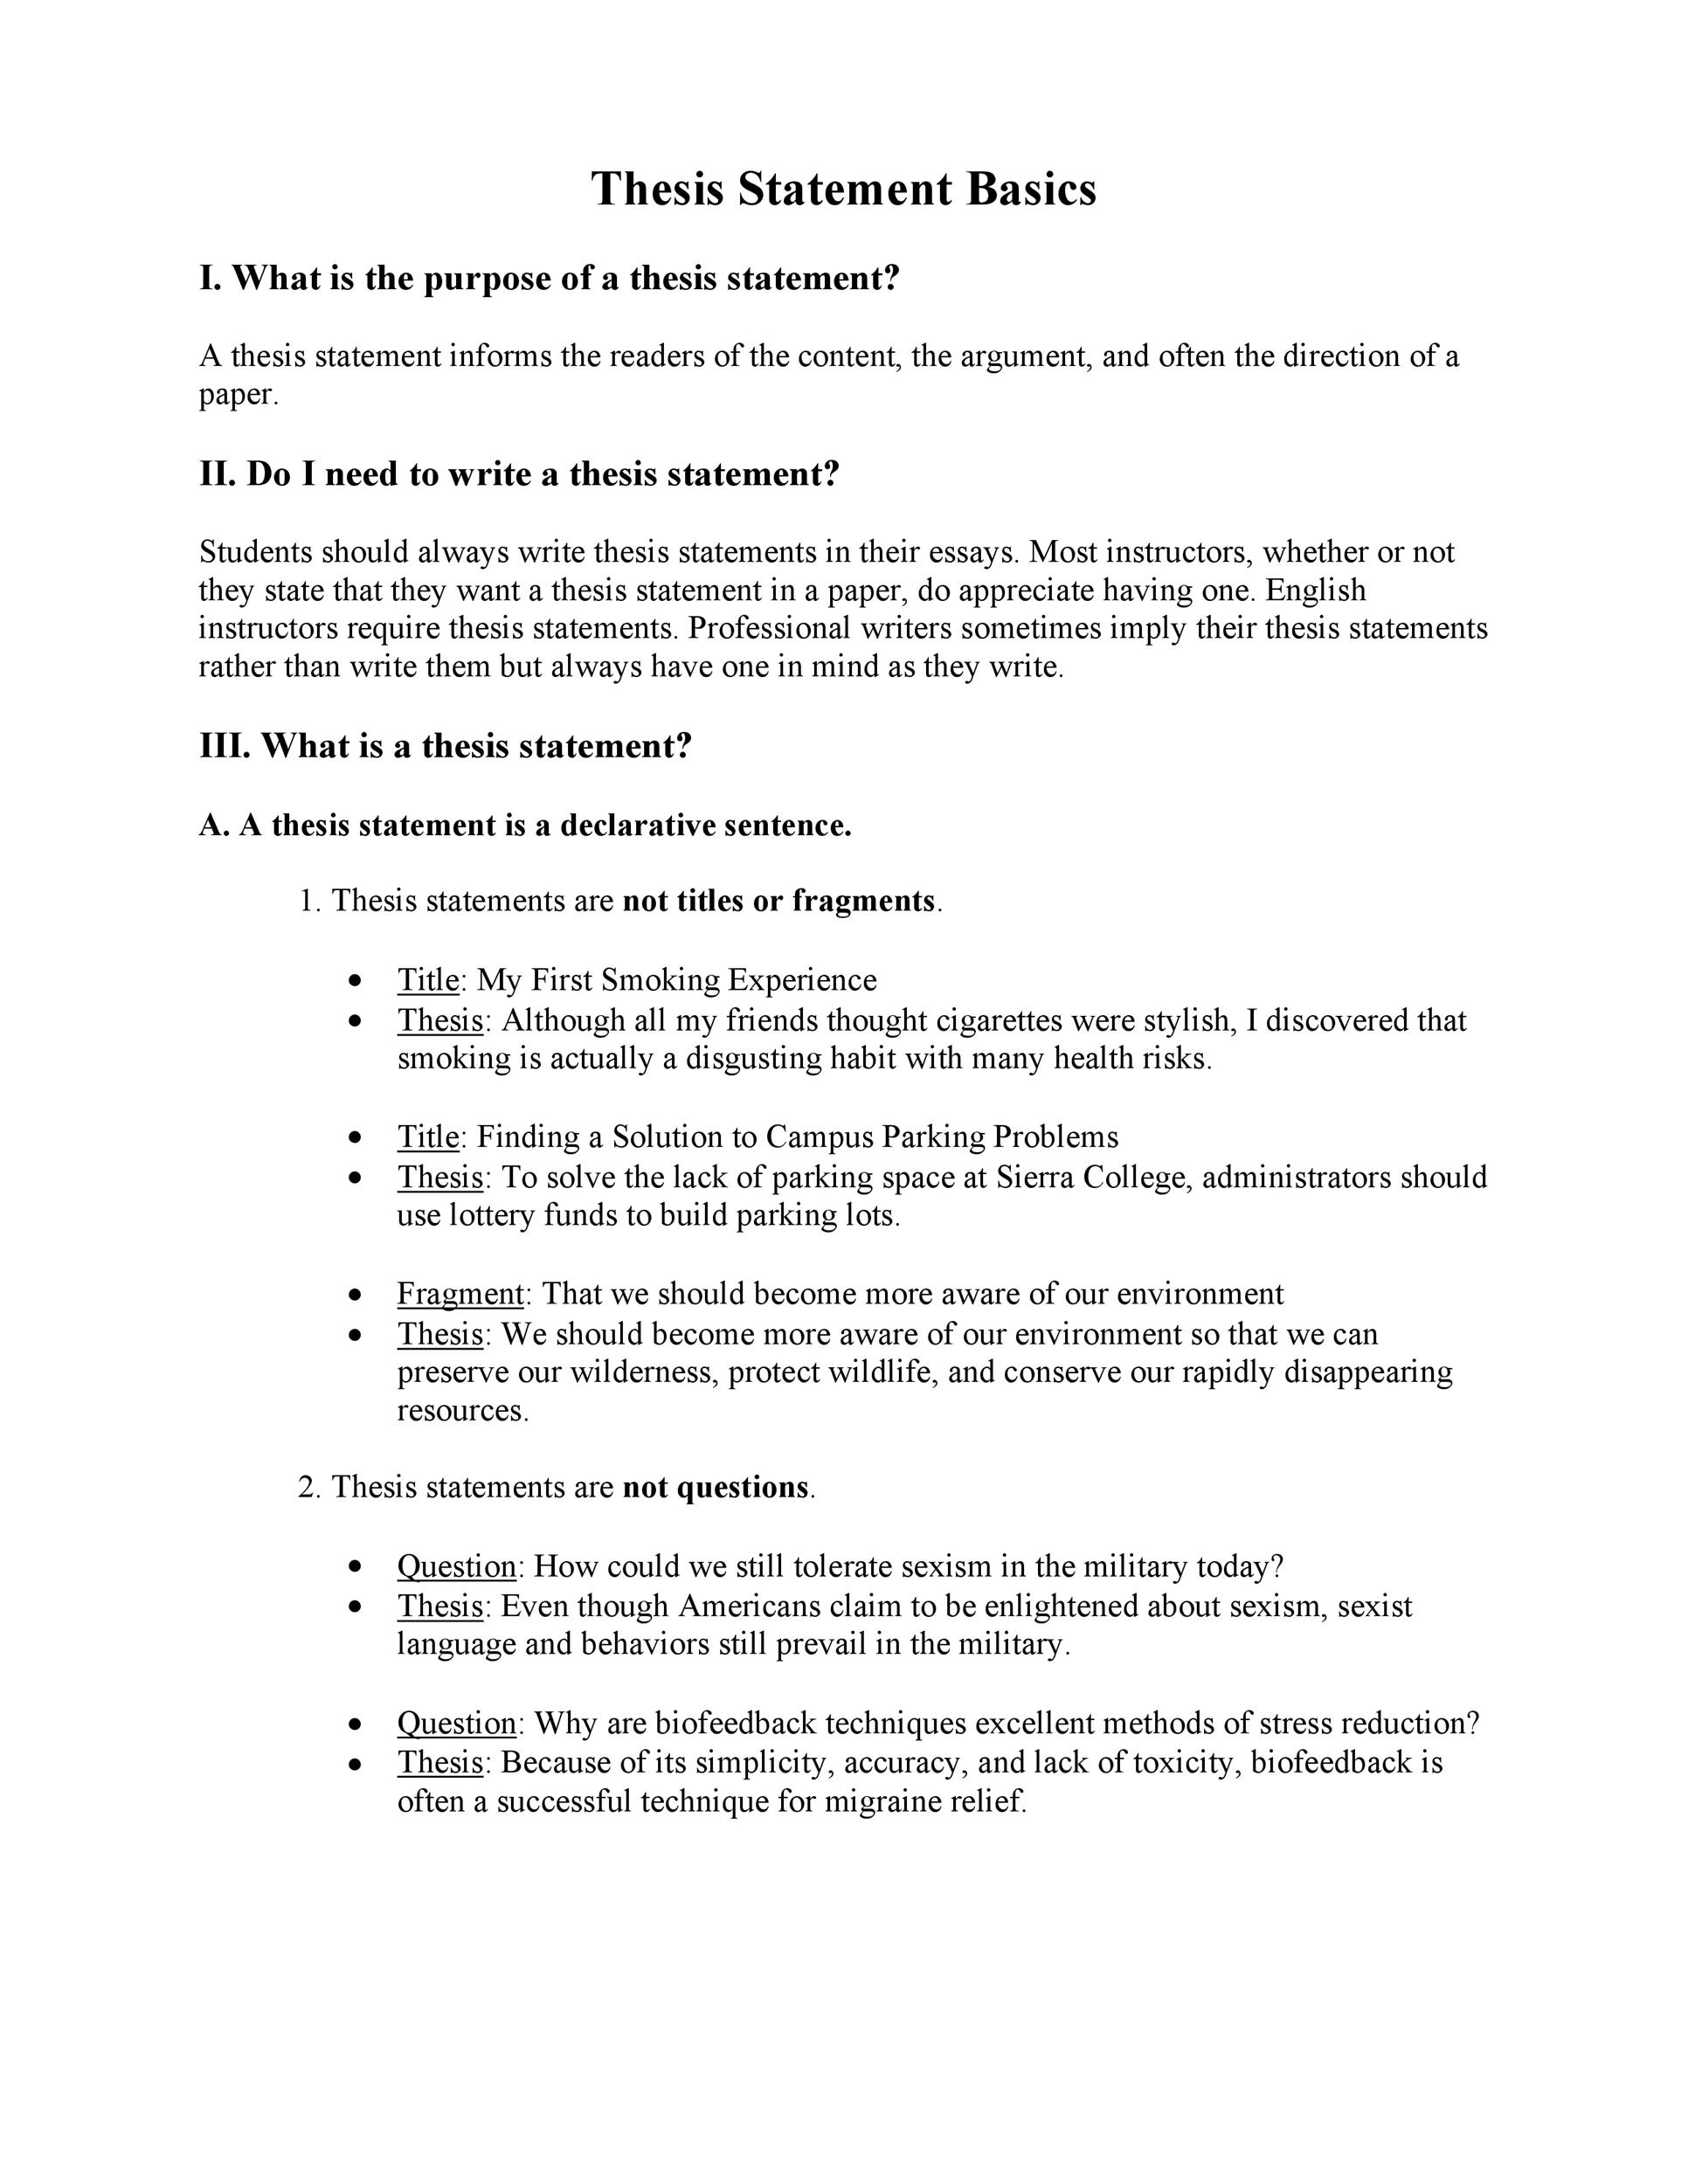 a thesis statement example for an essay